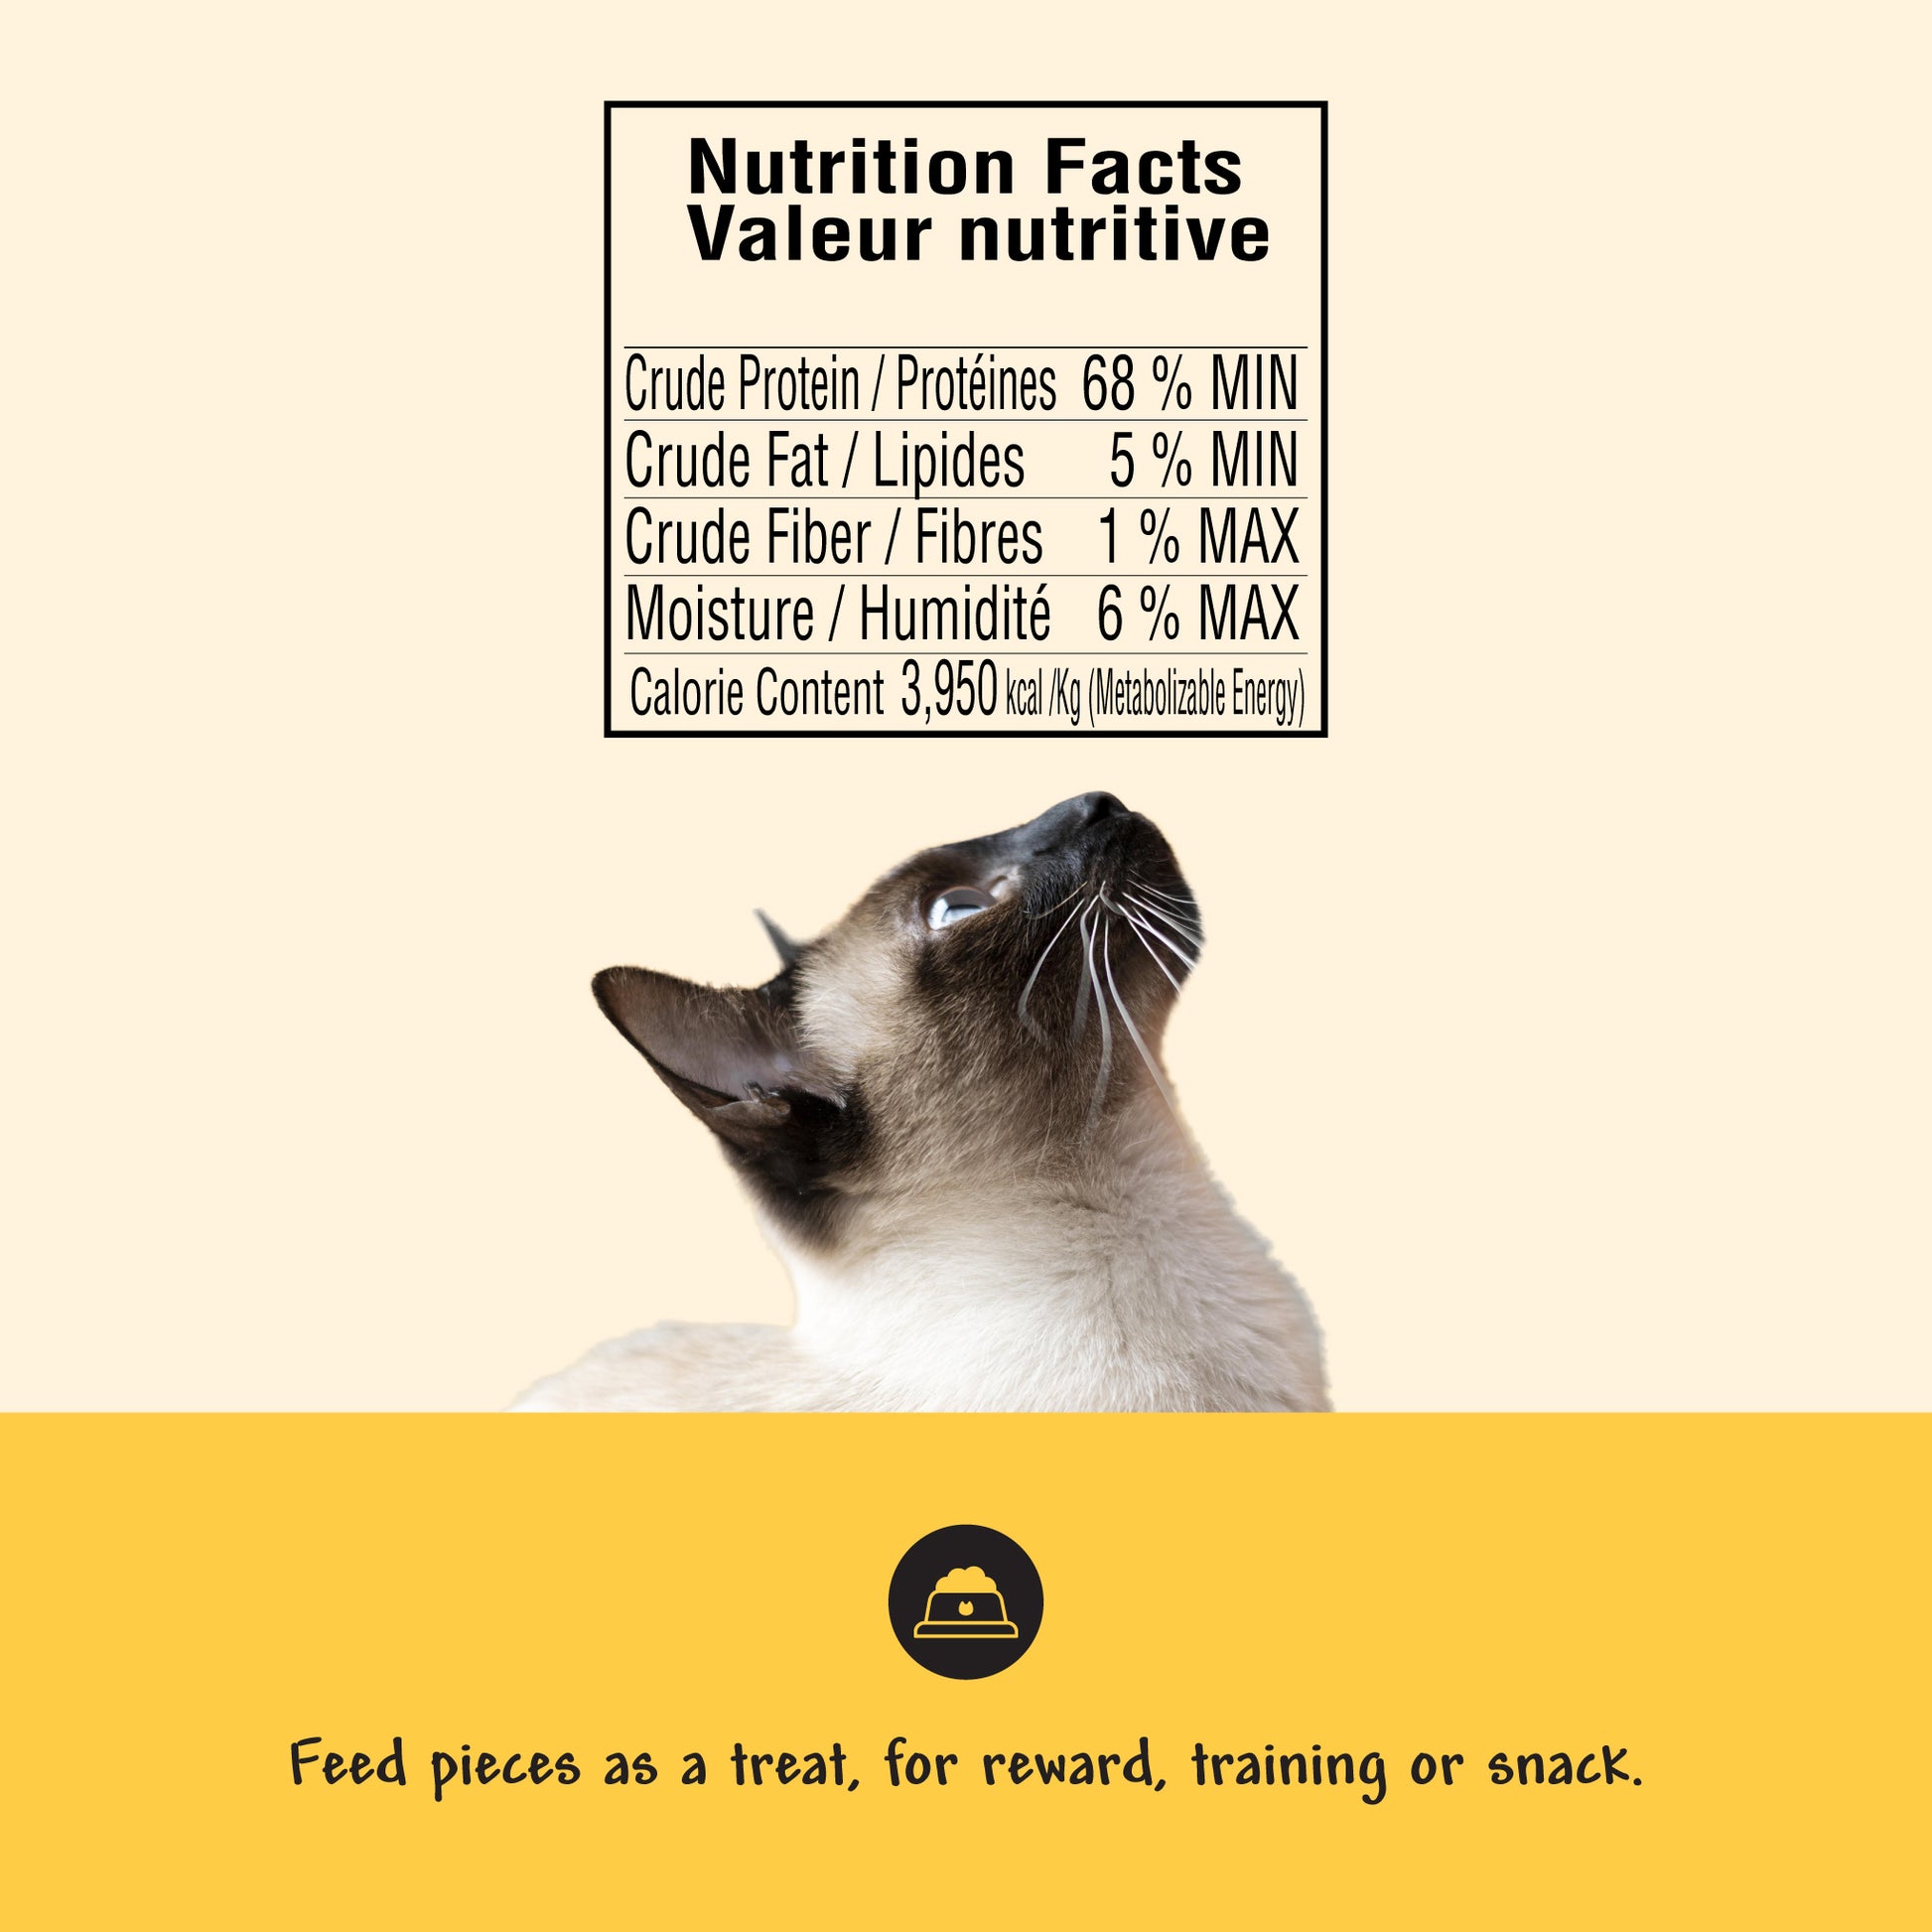 siamese cat looking upwards at the nutrition facts for cat treats and feeding guidelines